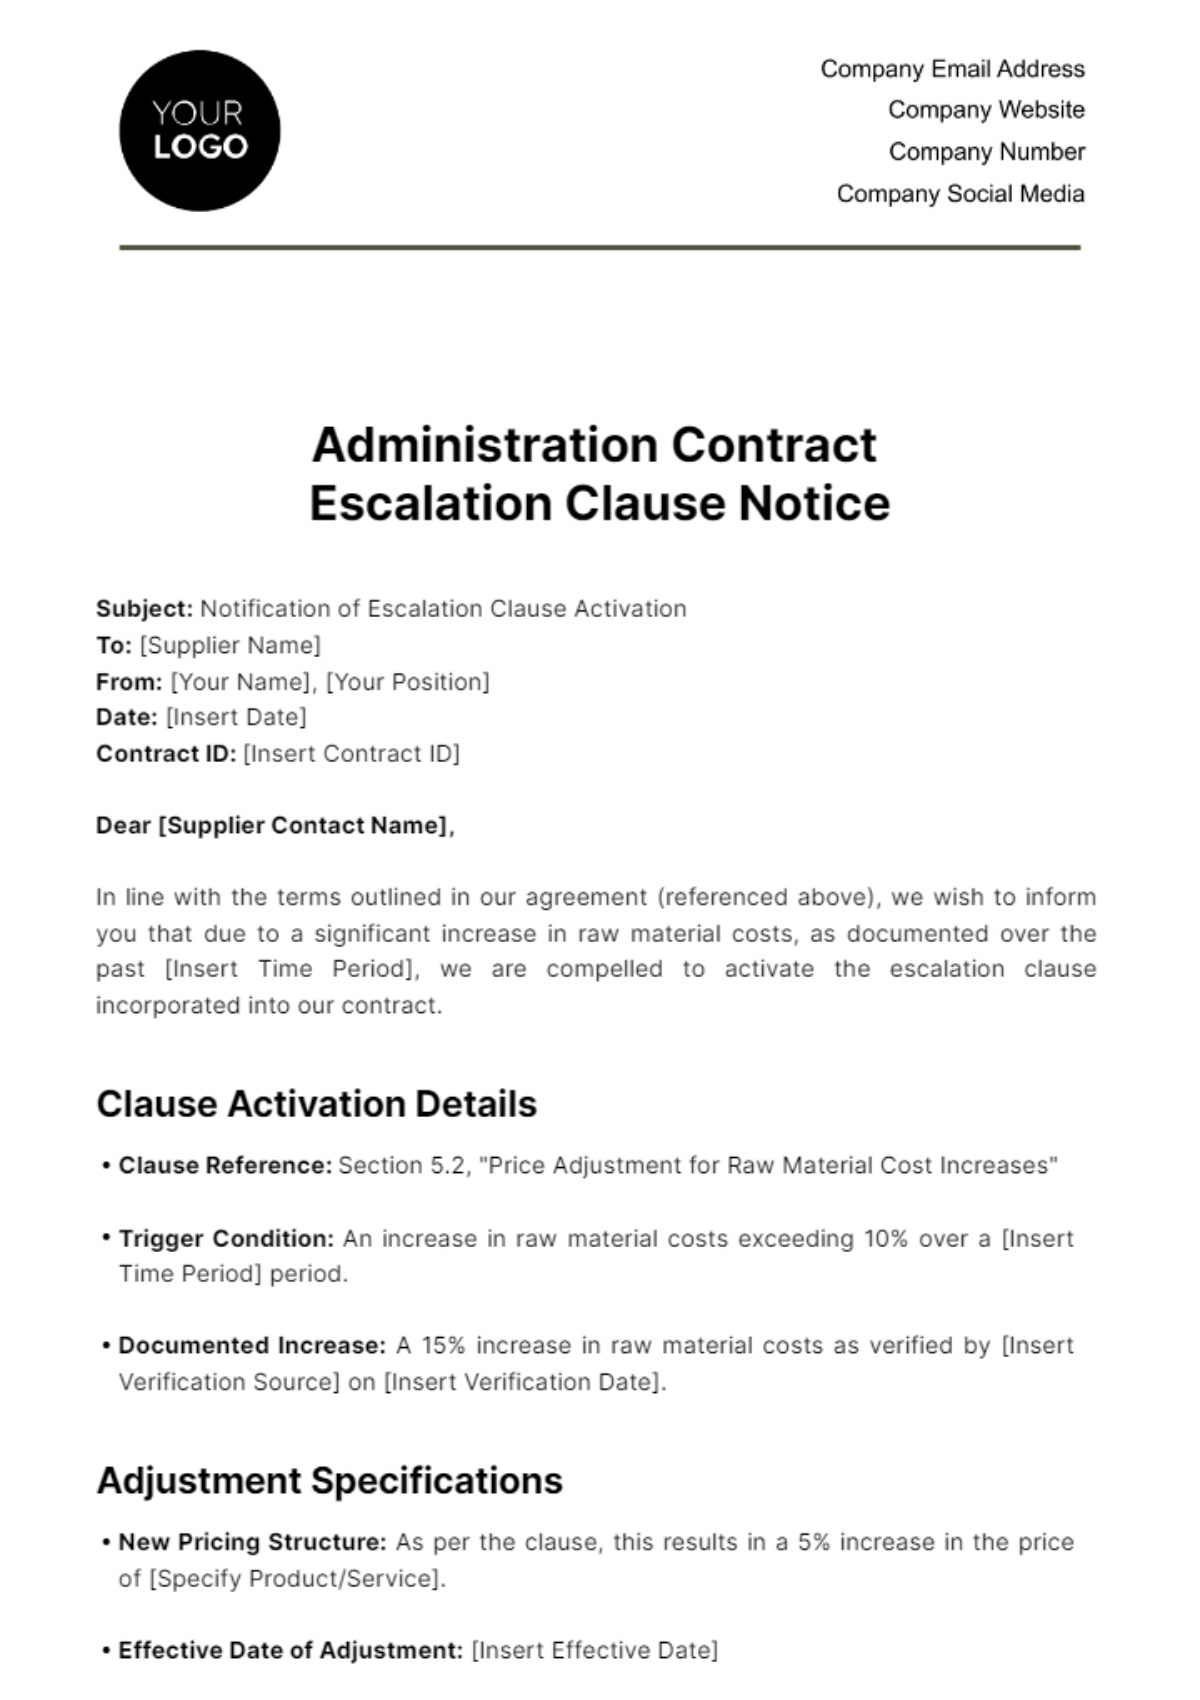 Free Administration Contract Escalation Clause Notice Template